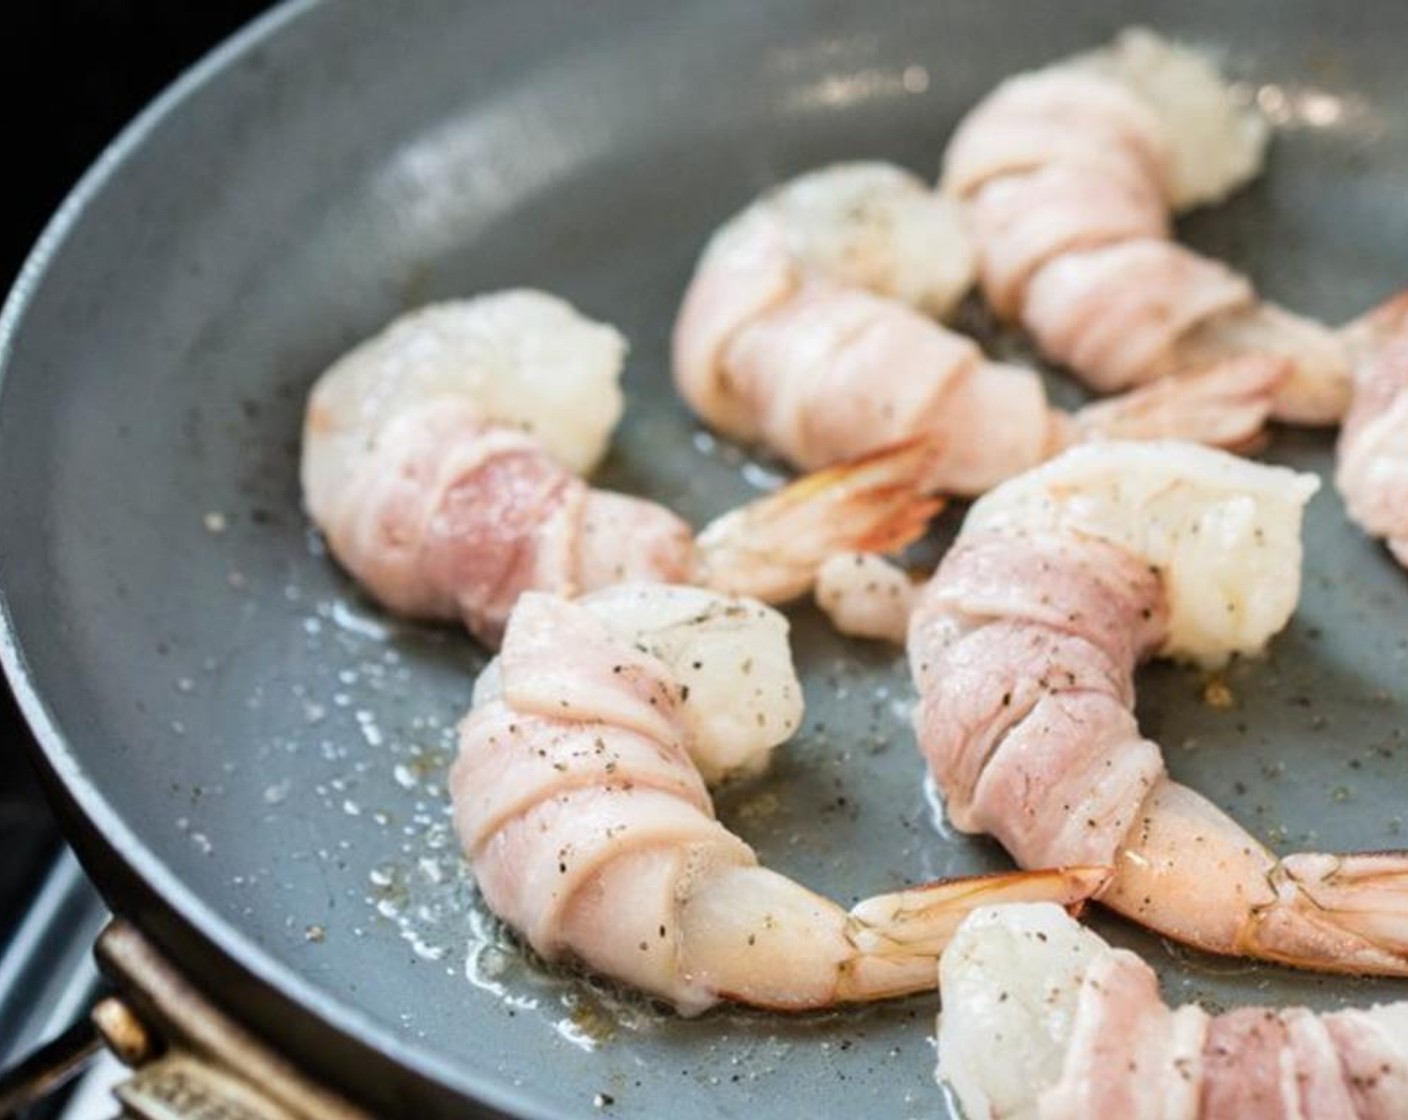 step 2 Heat up Cooking Oil (2 Tbsp) in a large shallow frying pan over medium-high heat. Place the bacon wrapped shrimp on to the pan. Don't move them! Let them sit for a minute, then use a pair of tongs to flip them over to cook the other side for another minute.